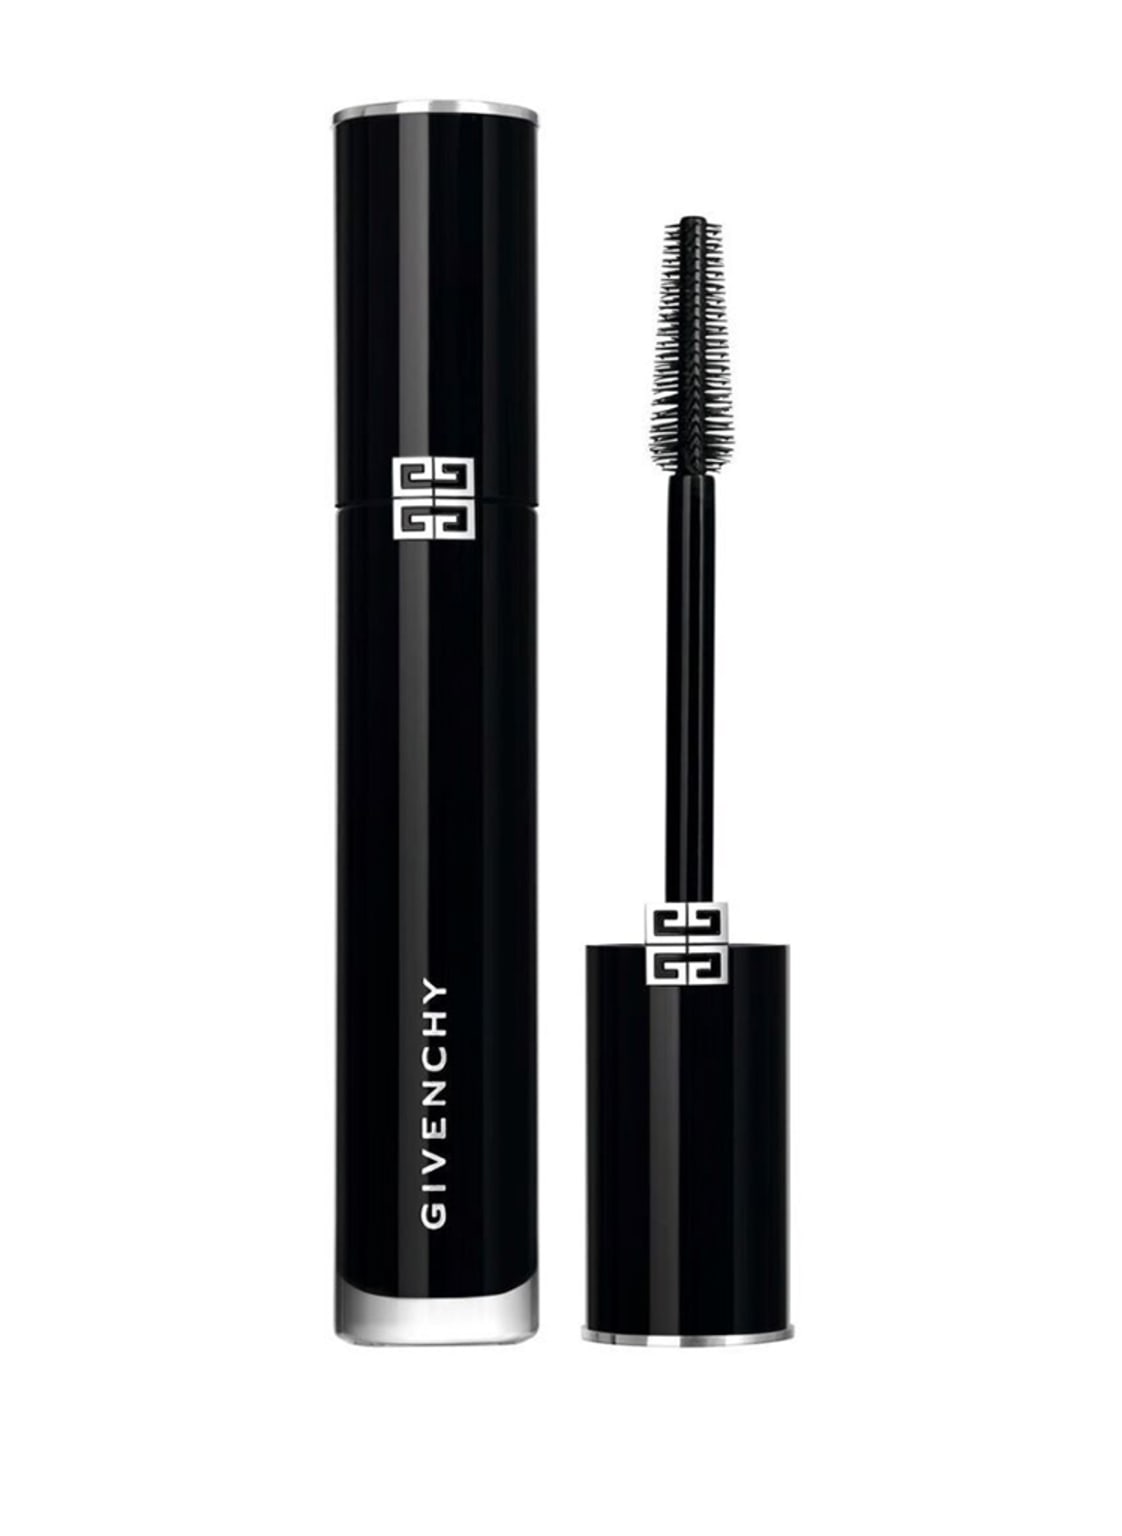 Givenchy Beauty L'interdit Mascara Couture Volume Mascara von GIVENCHY BEAUTY